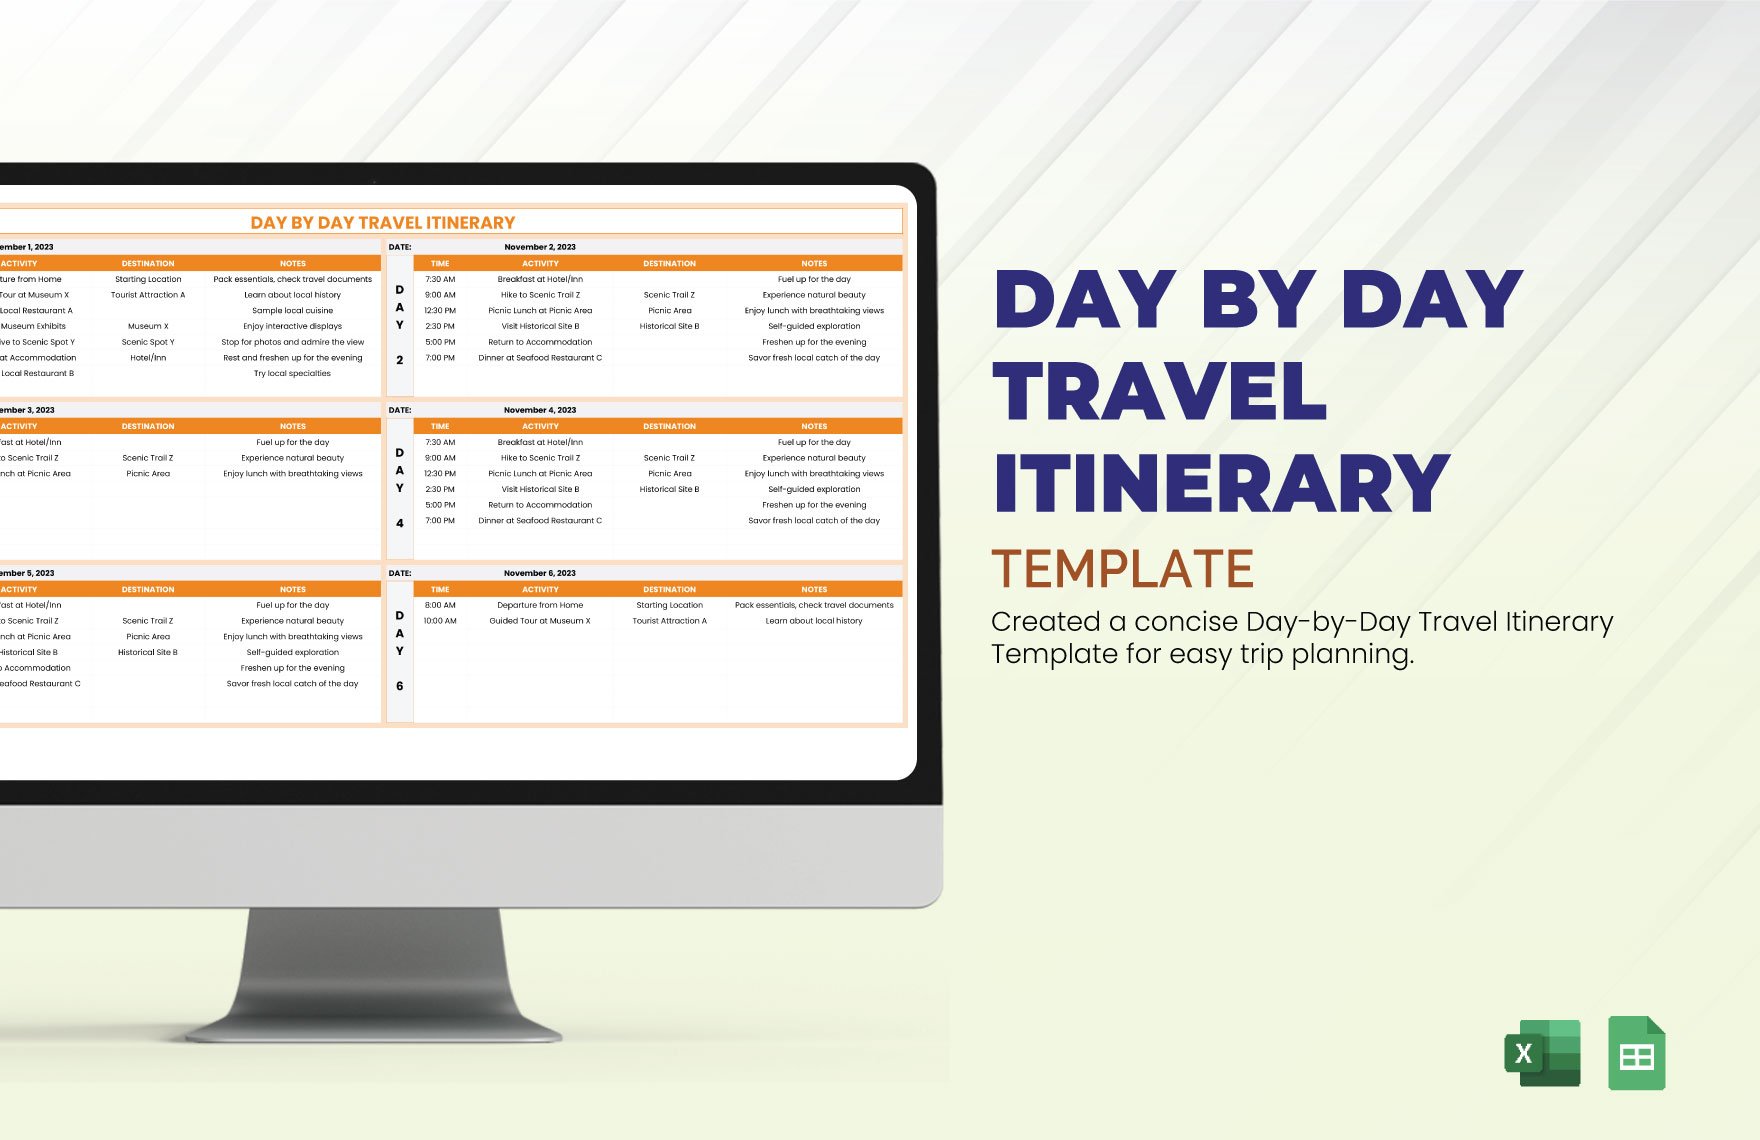 Day by Day Travel Itinerary Template